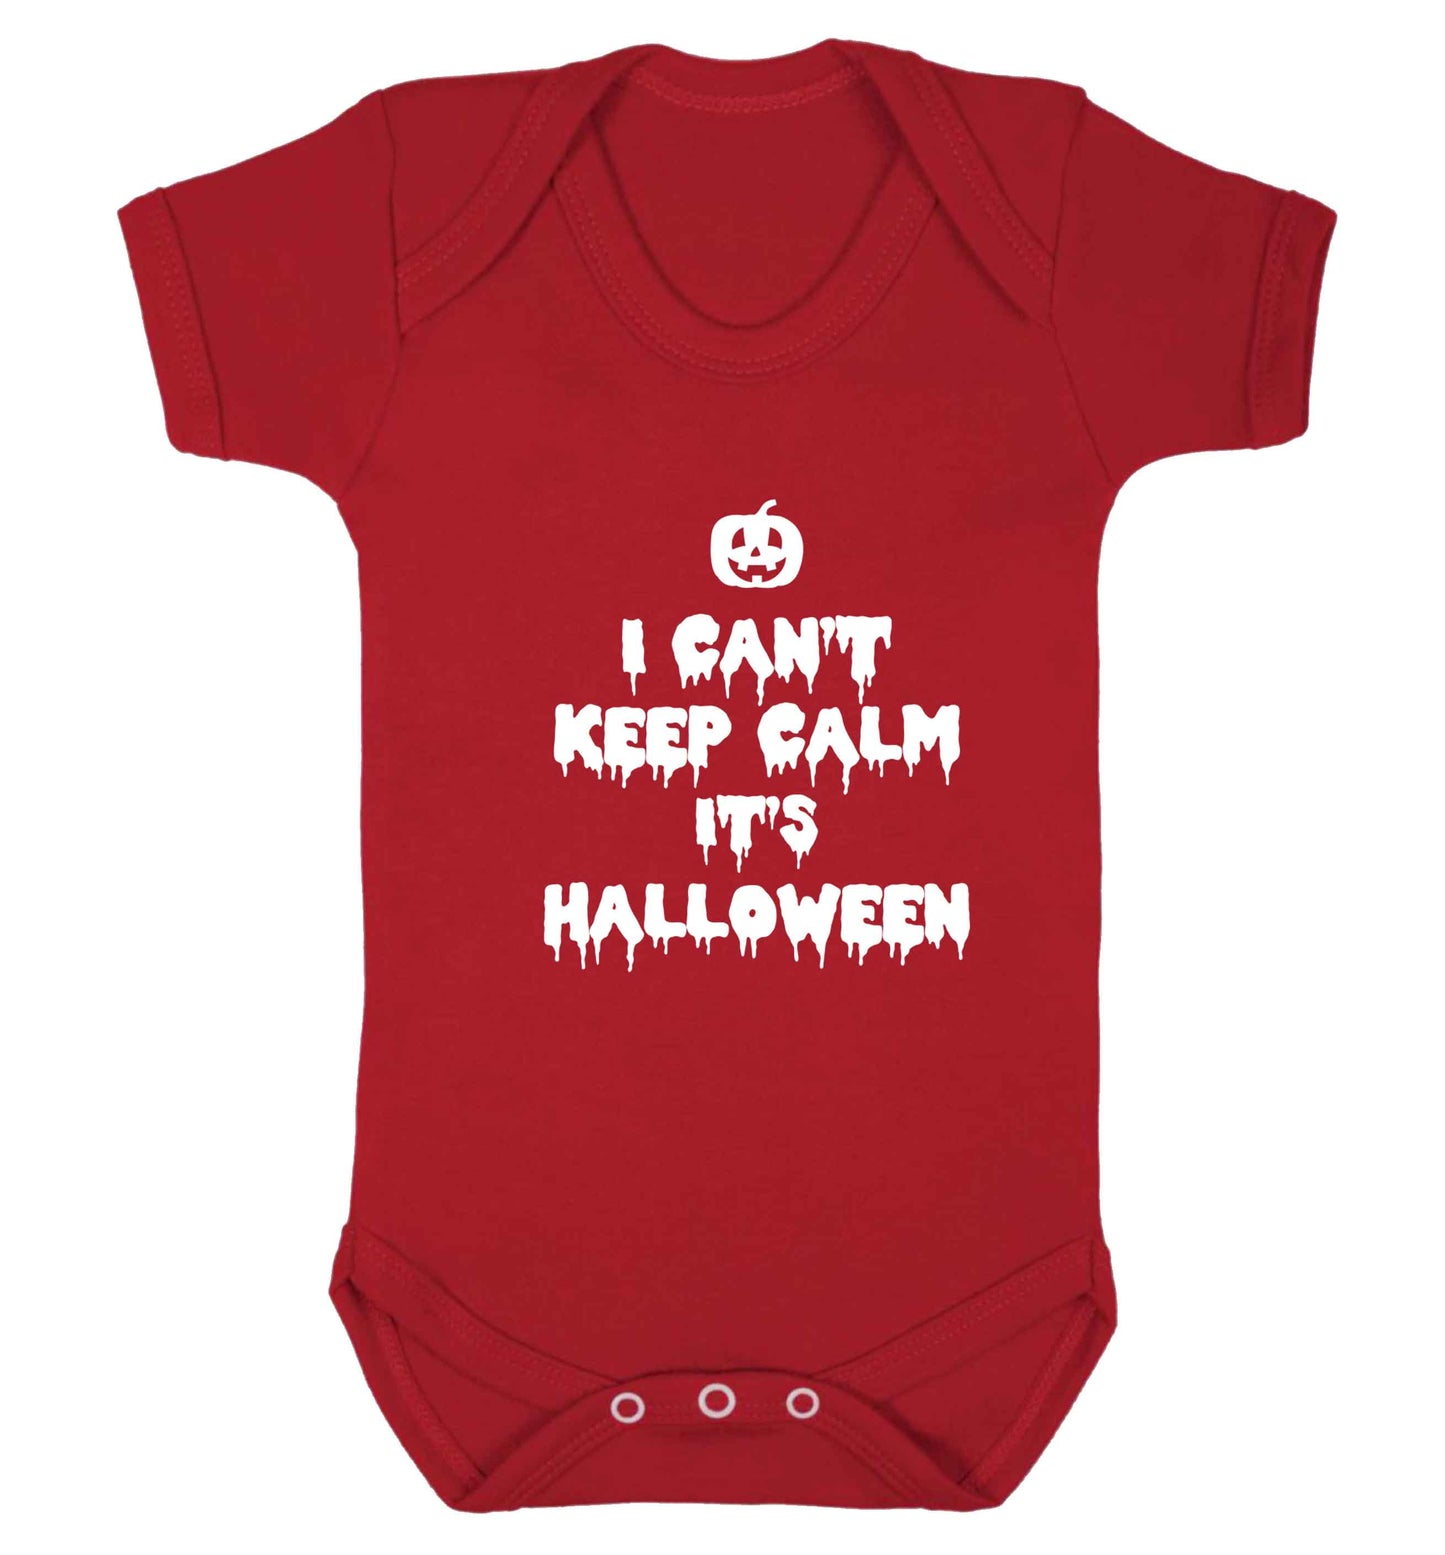 I can't keep calm it's halloween baby vest red 18-24 months